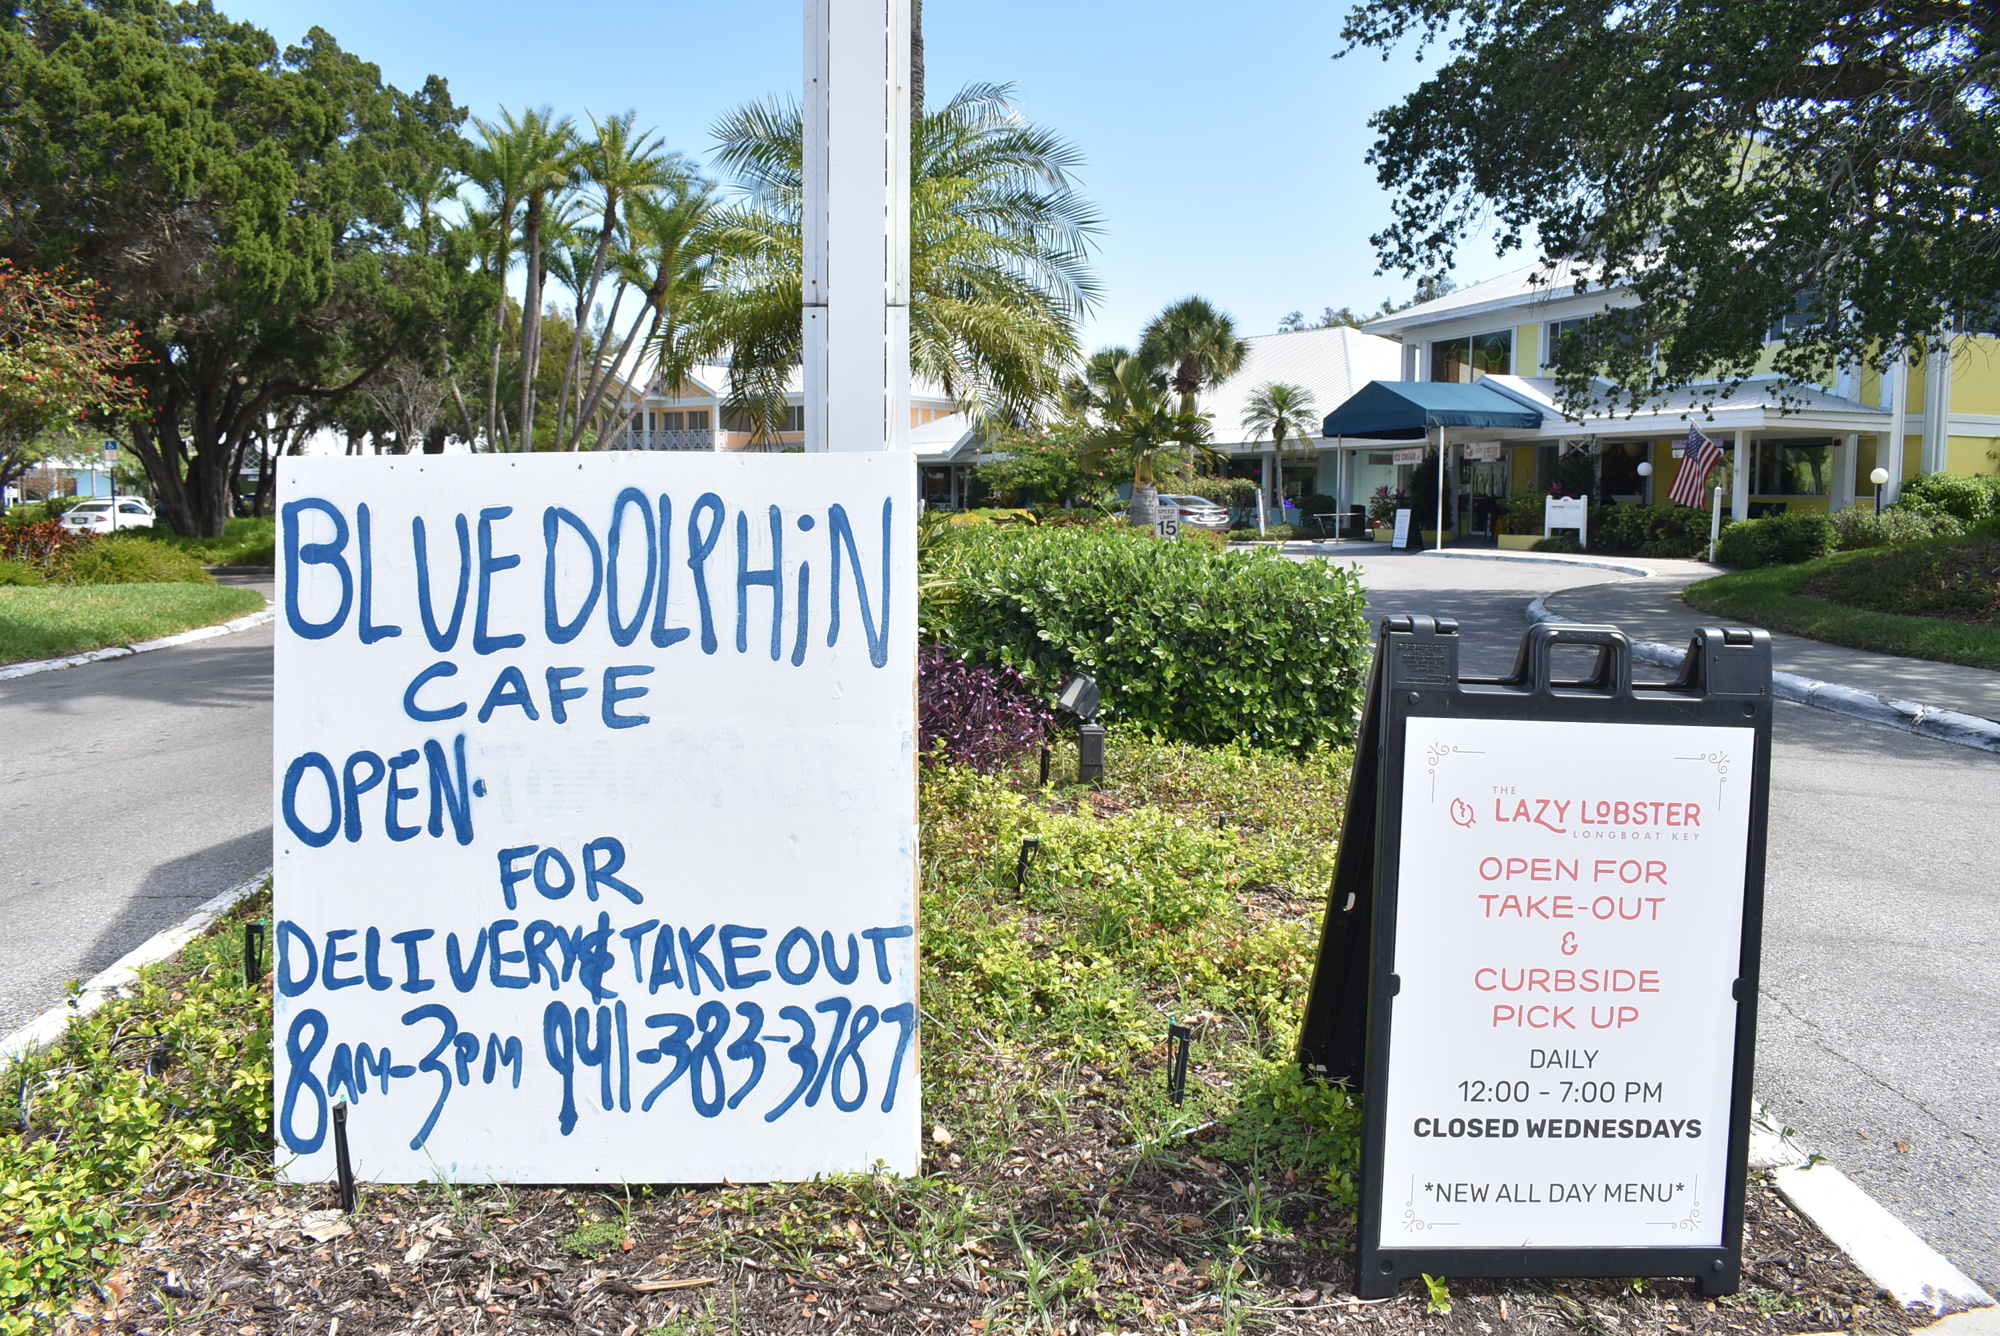 Blue Dolphin Cafe and Lazy Lobster advertise their delivery and takeout services.